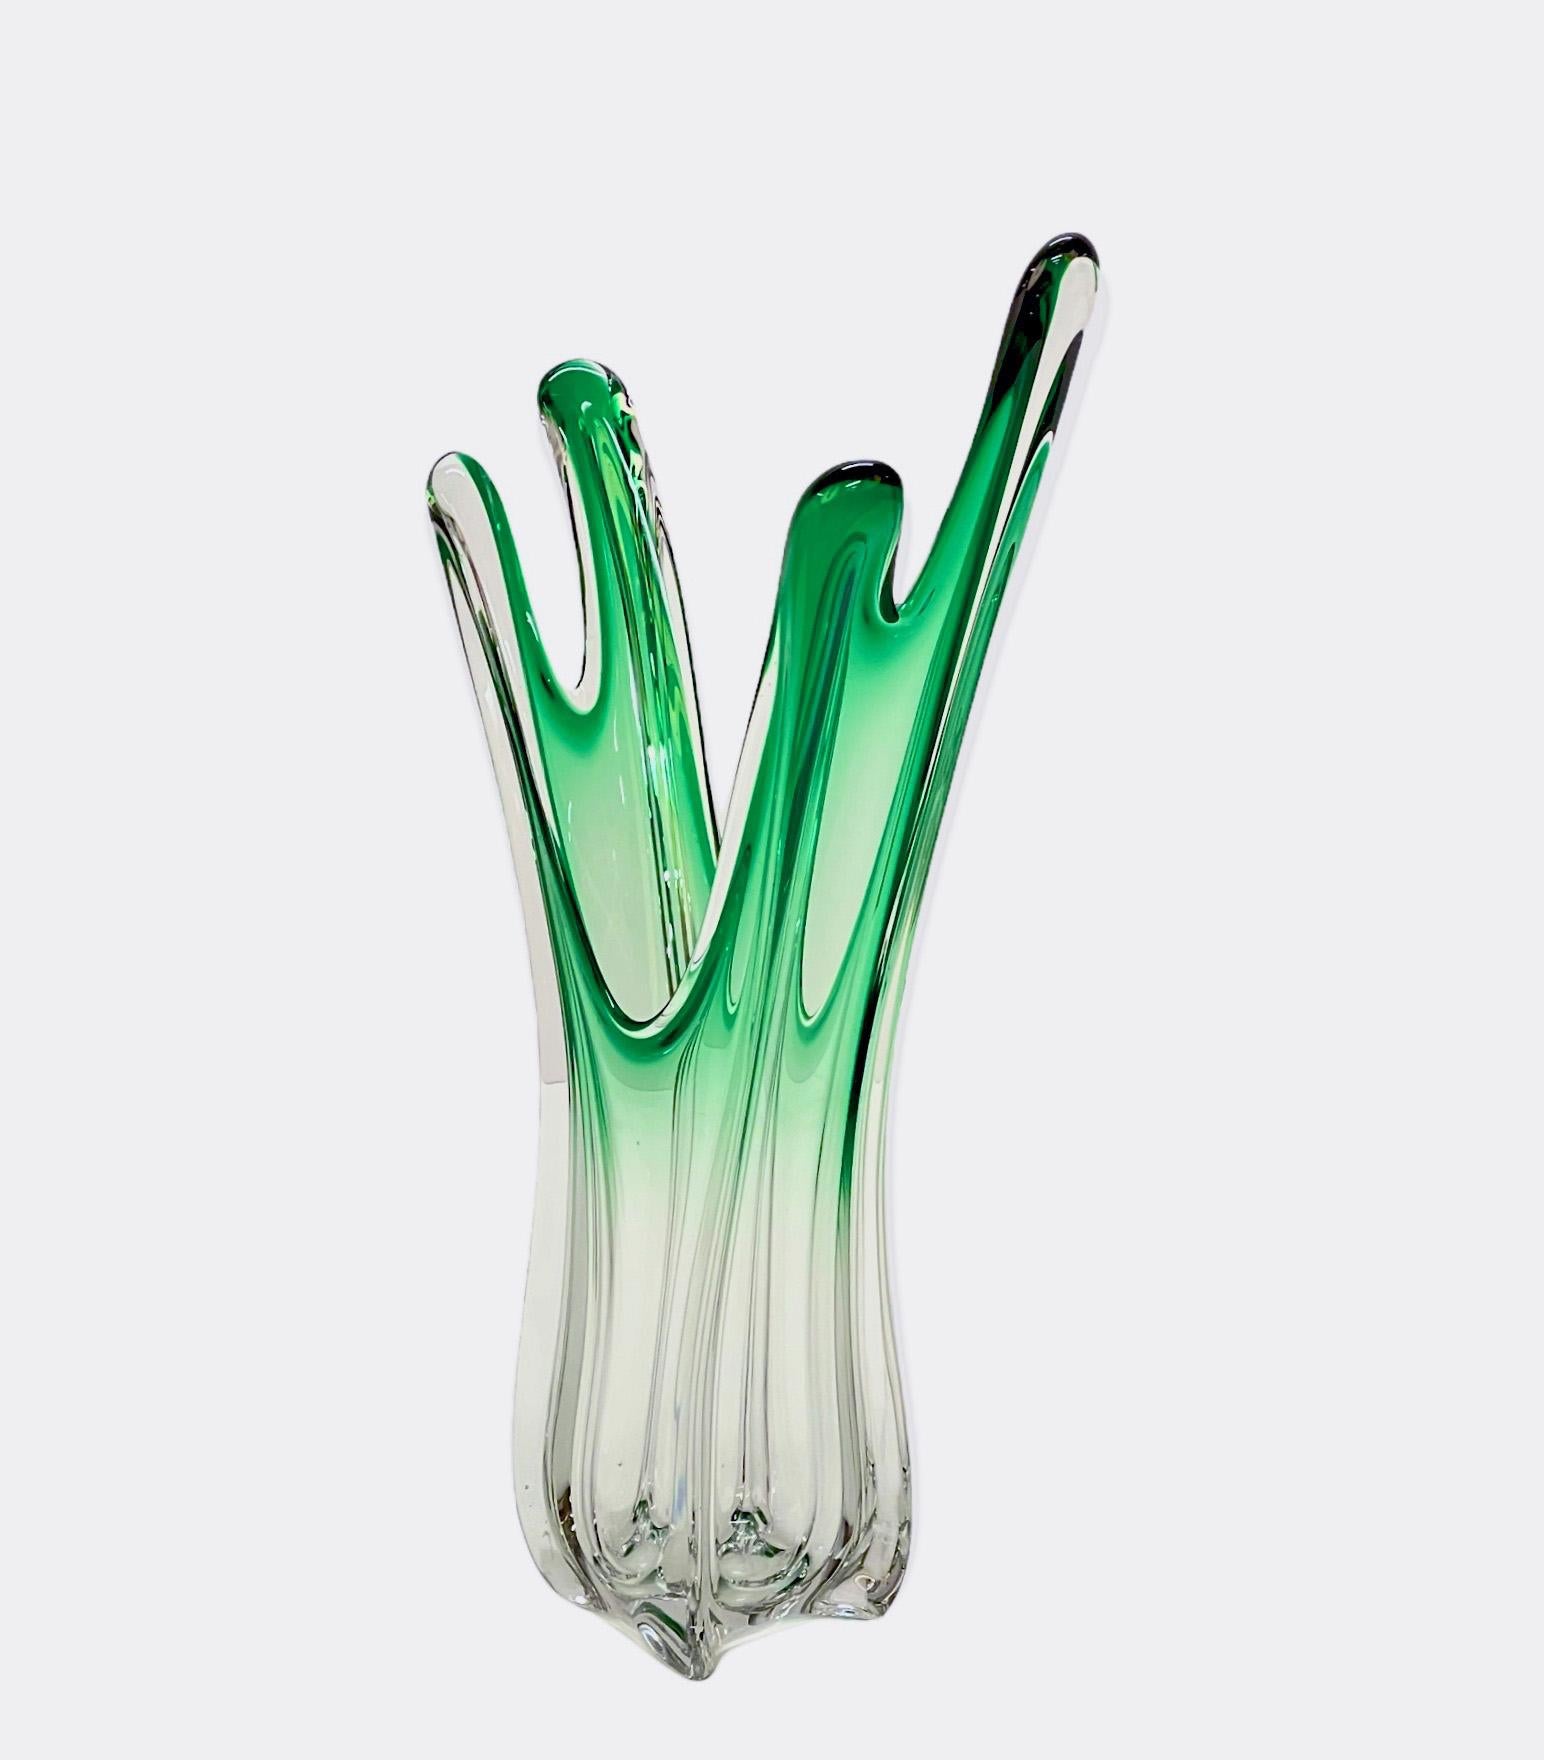 Midcentury Green Art Murano Glass Italian Vase Attributed to F.lli Toso, 1950s For Sale 3